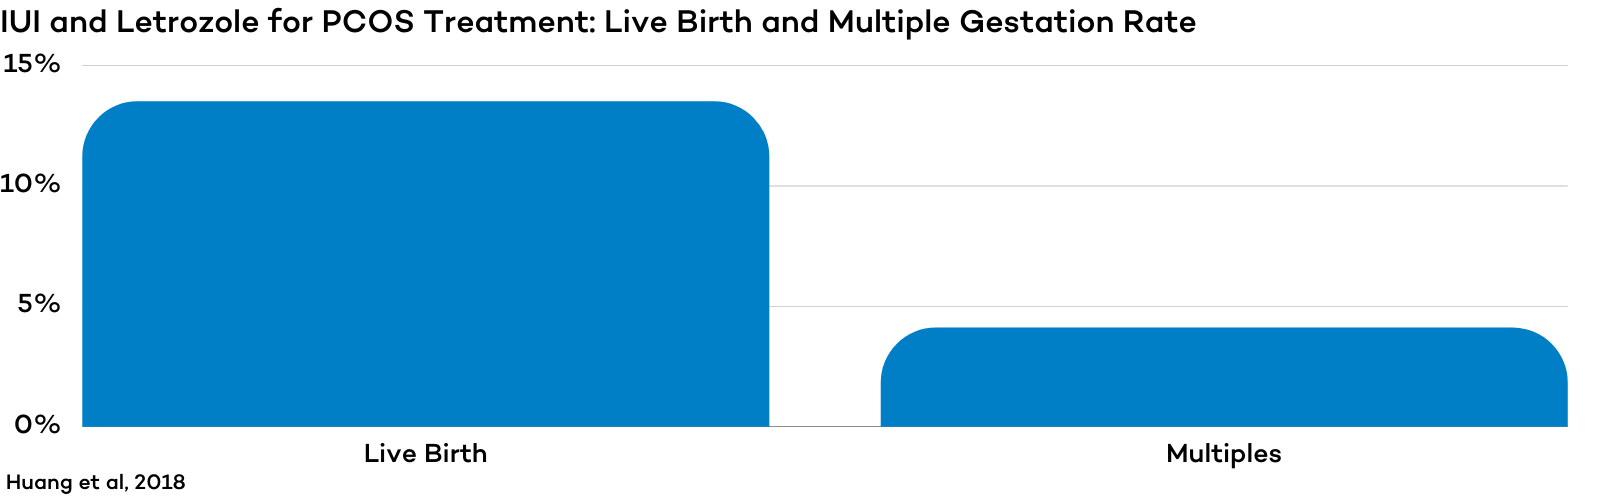 IUI and Letrozole for PCOS Treatment Live Birth and Multiple Gestation Rate